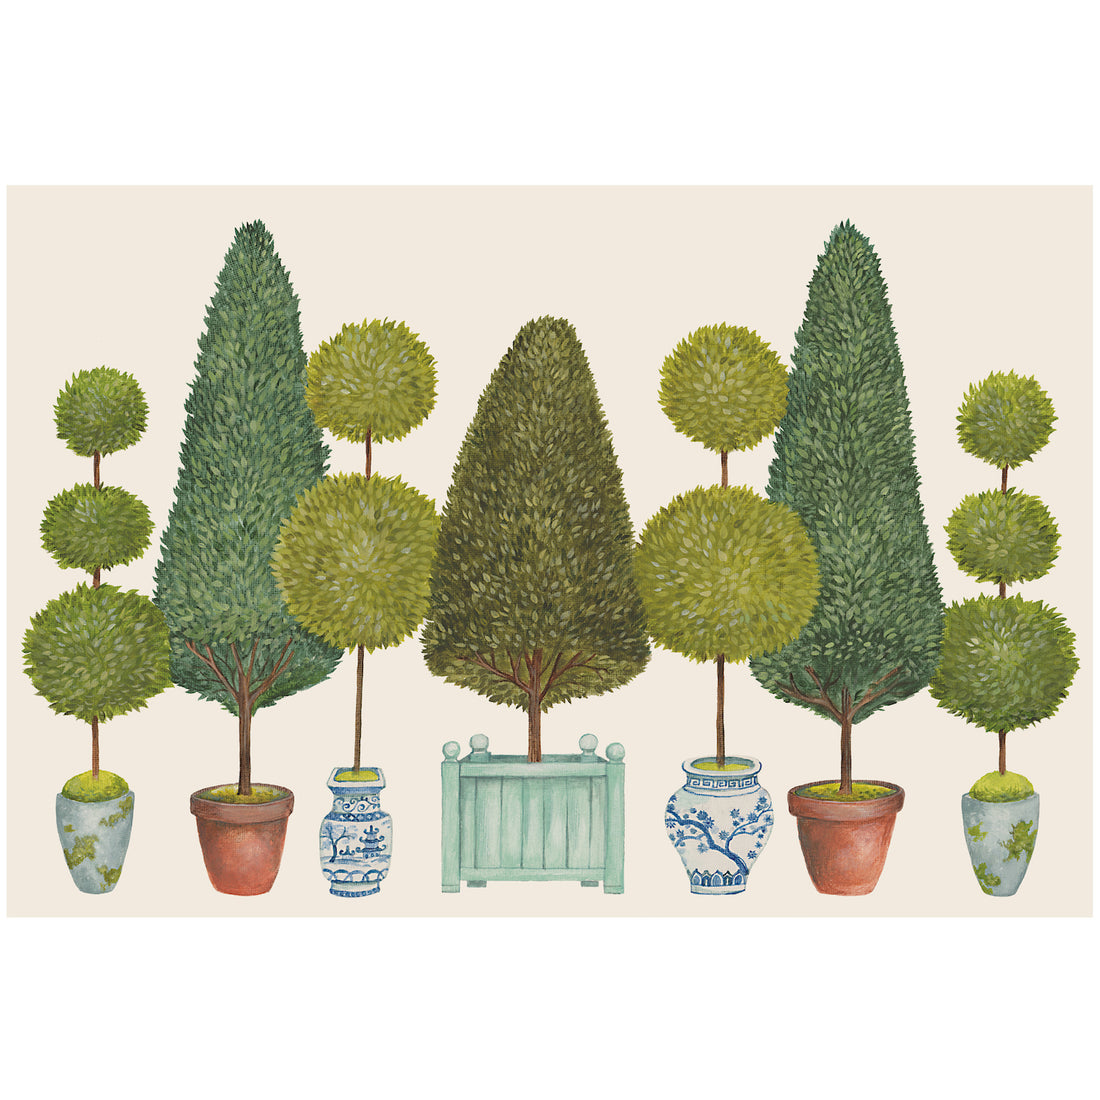 An illustration of seven potted topiary shrubs, alternatingly pruned into balls or a tapered shape, on a cream background.